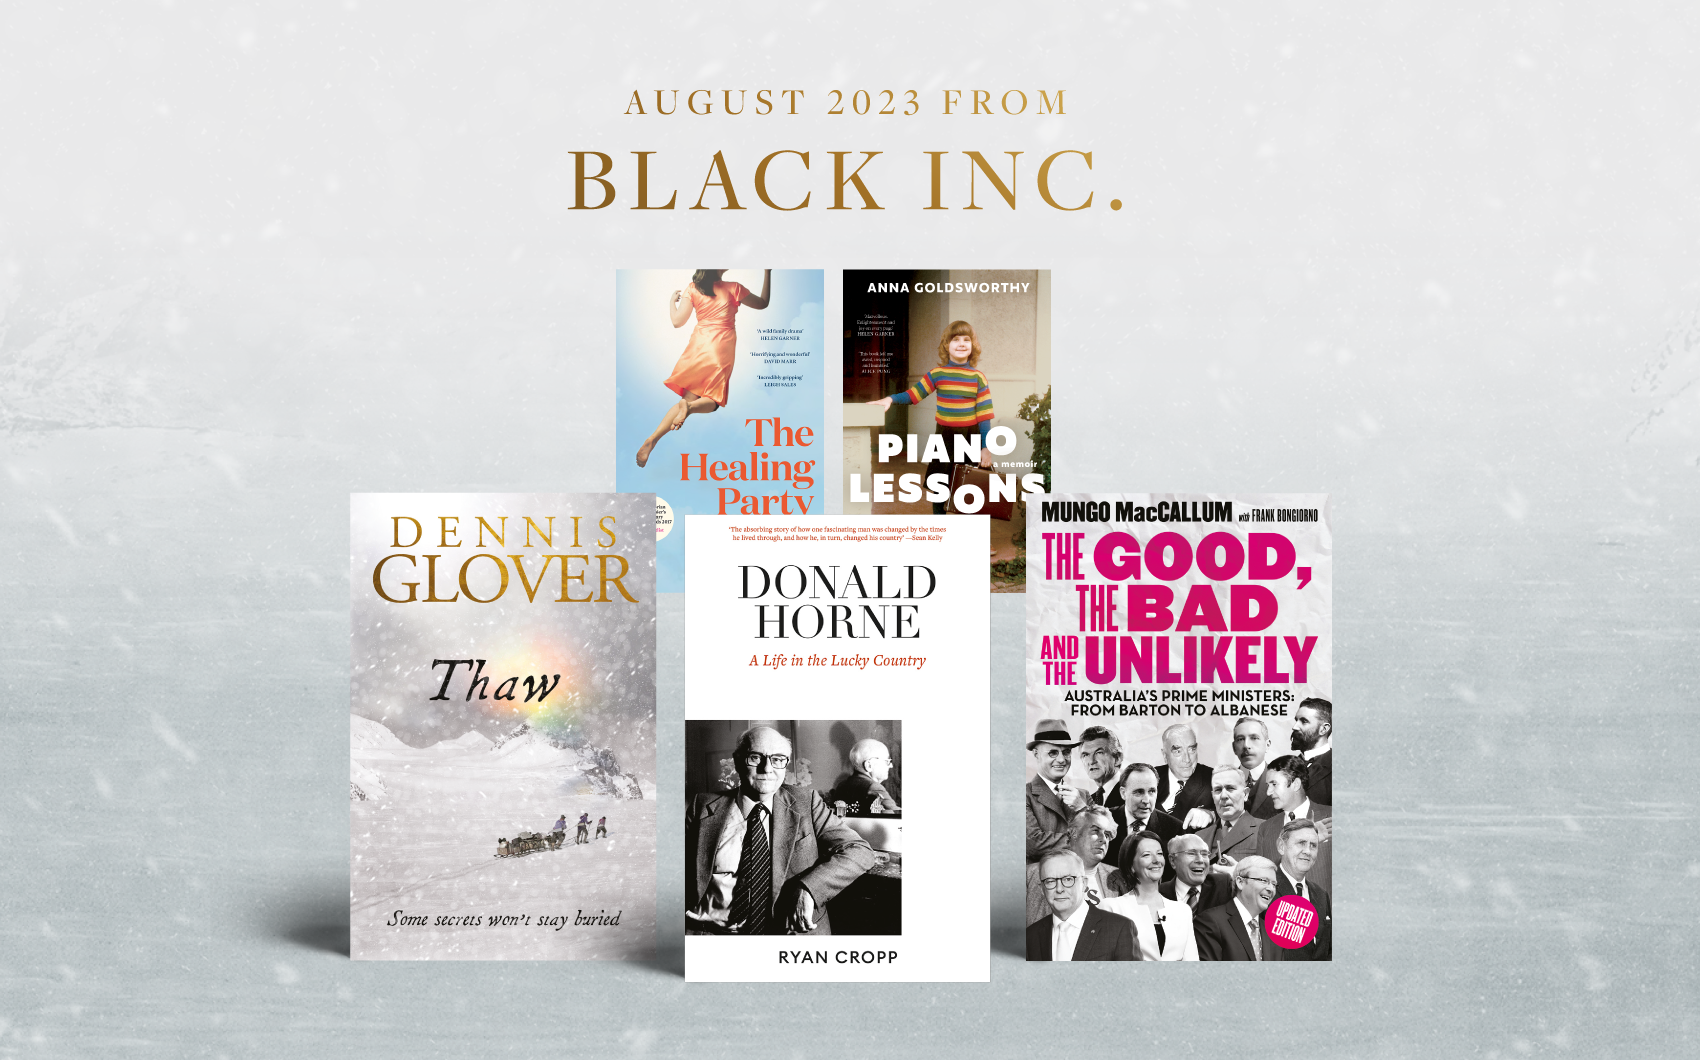 August 2023 new releases from Black Inc.